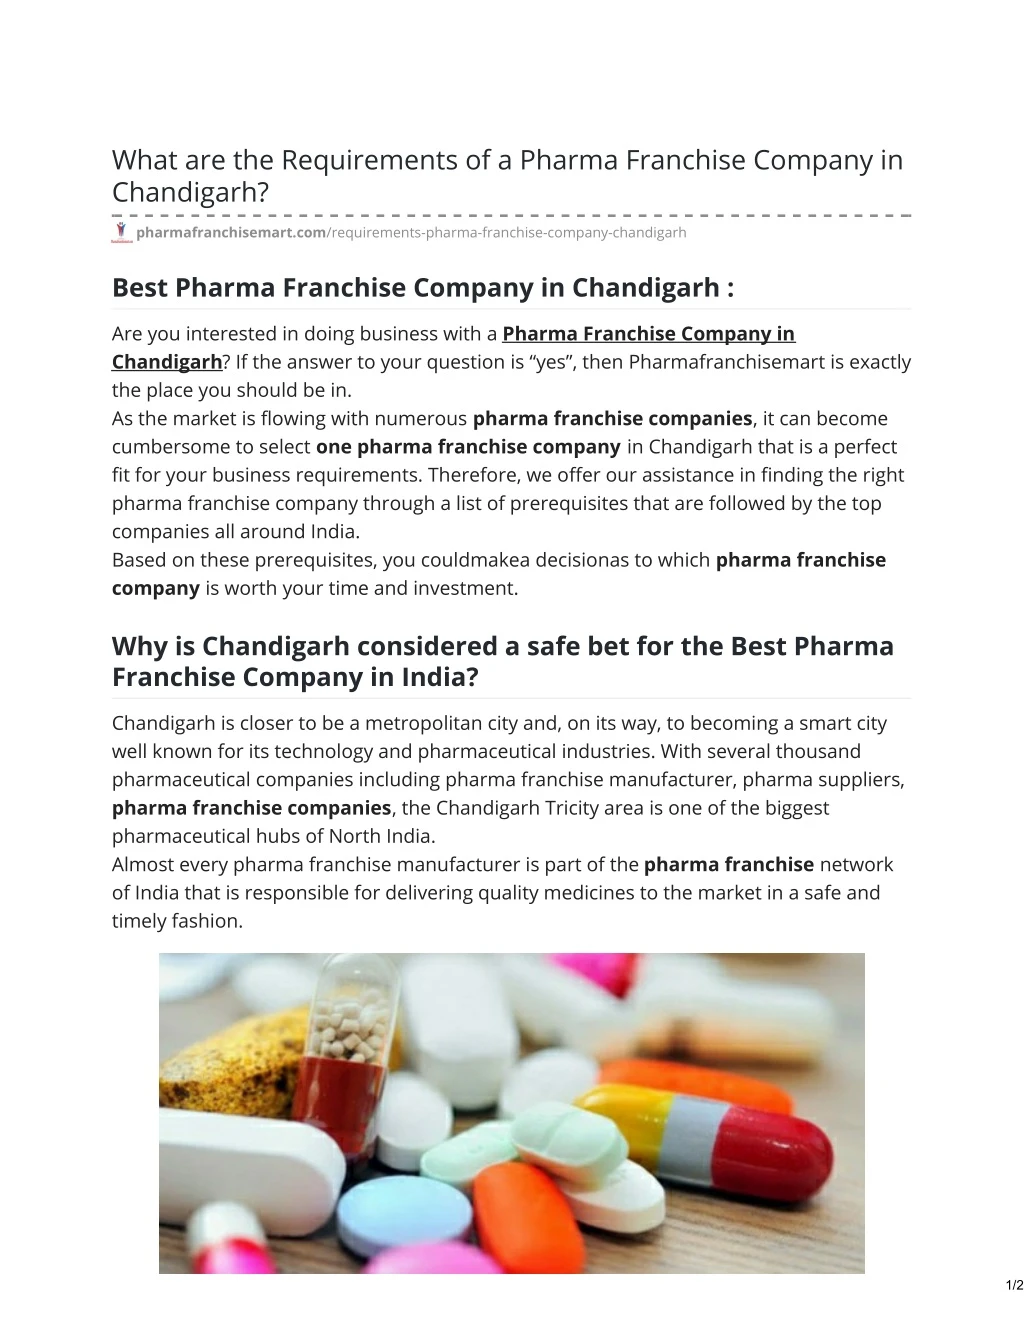 what are the requirements of a pharma franchise